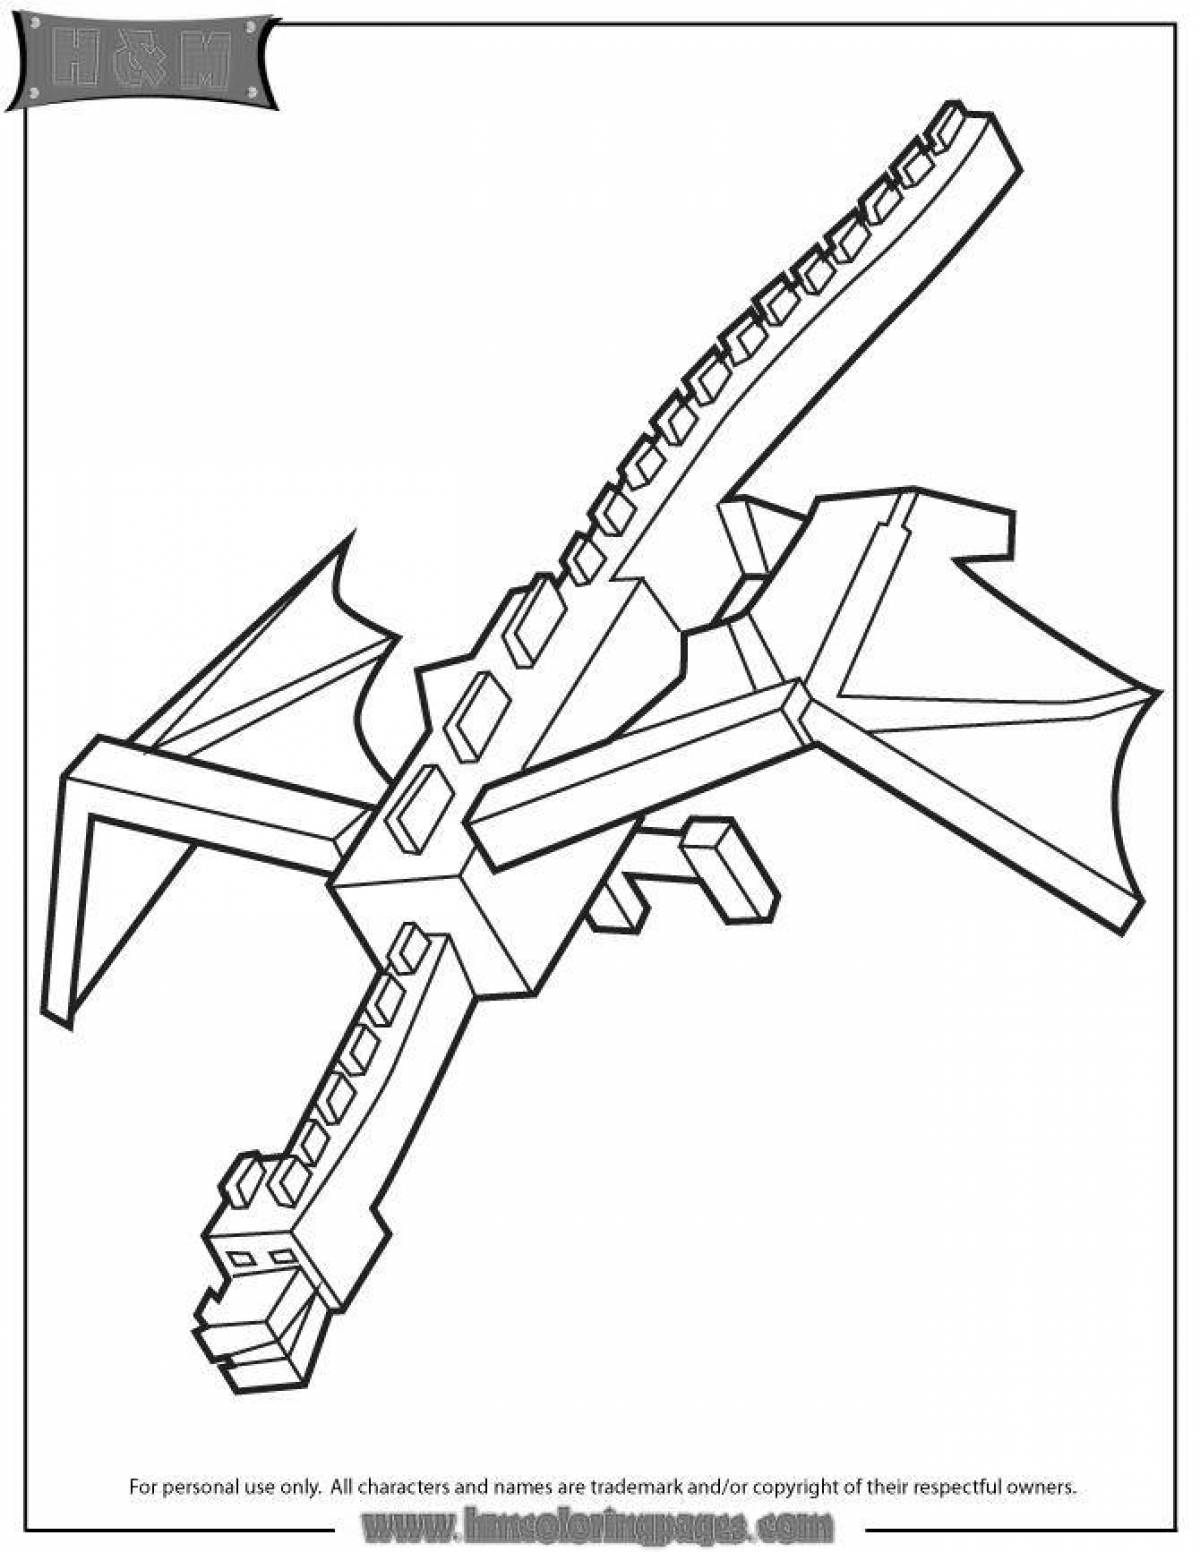 Glorious ender dragon coloring page